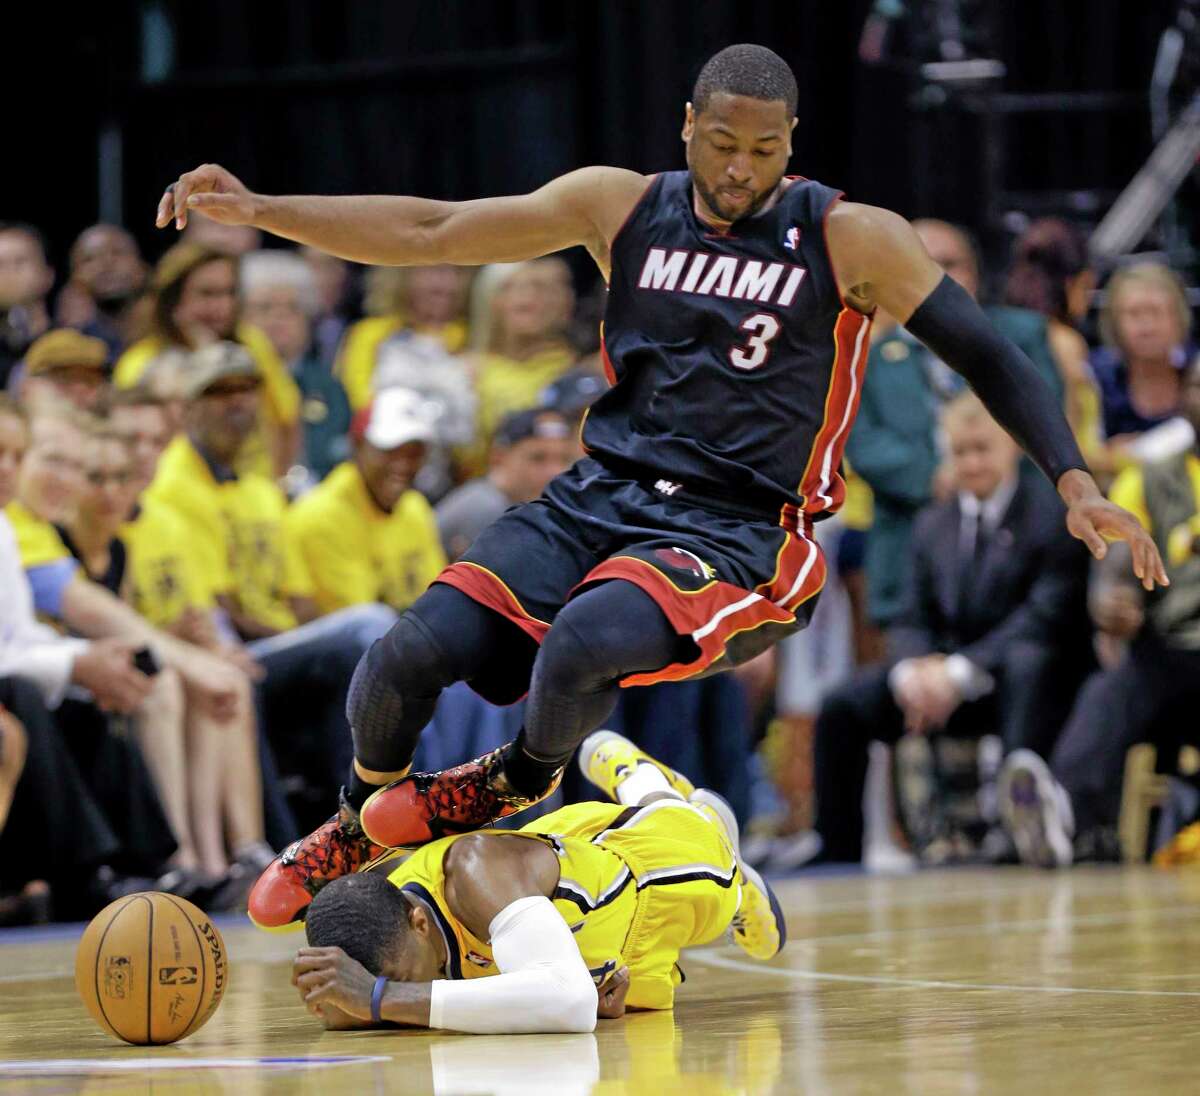 Miami Heat guard Dwyane Wade goes over Indiana Pacers forward Paul George as they go after a loose ball during the fourth quarter of Game 2 of the Eastern Conference finals Tuesday night in Indianapolis.